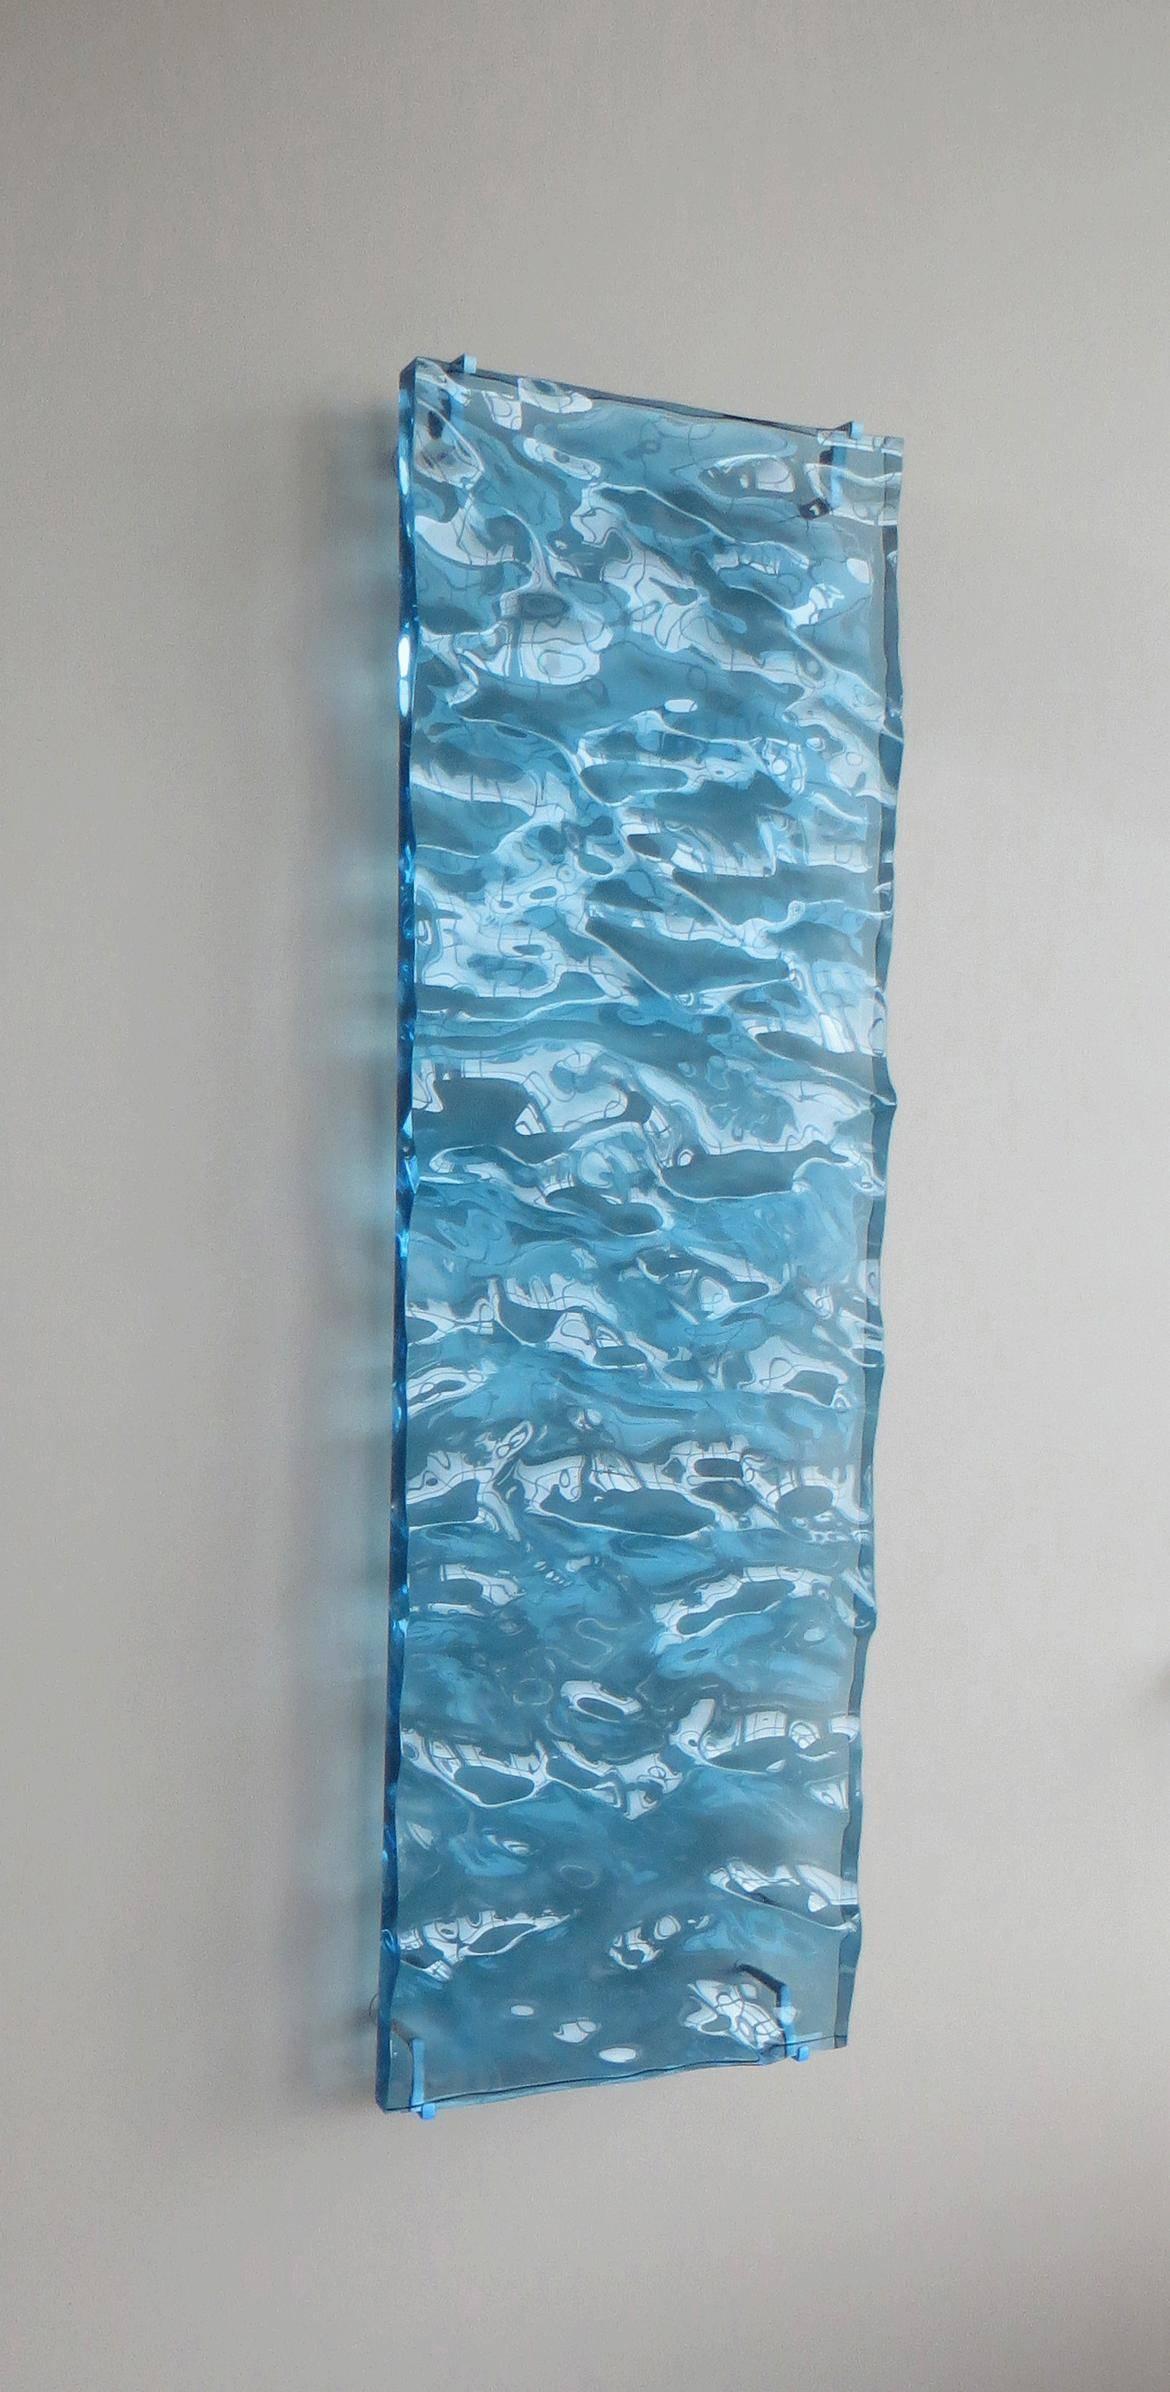 Carved Acrylic Sculpture (Blue)
48 x 15 x 2 inches
Edition 1 of 5

When Collier creates a new water surface she starts with a brush that she builds with software. This brush is essentially a model of wind because wind is the source of waves in the